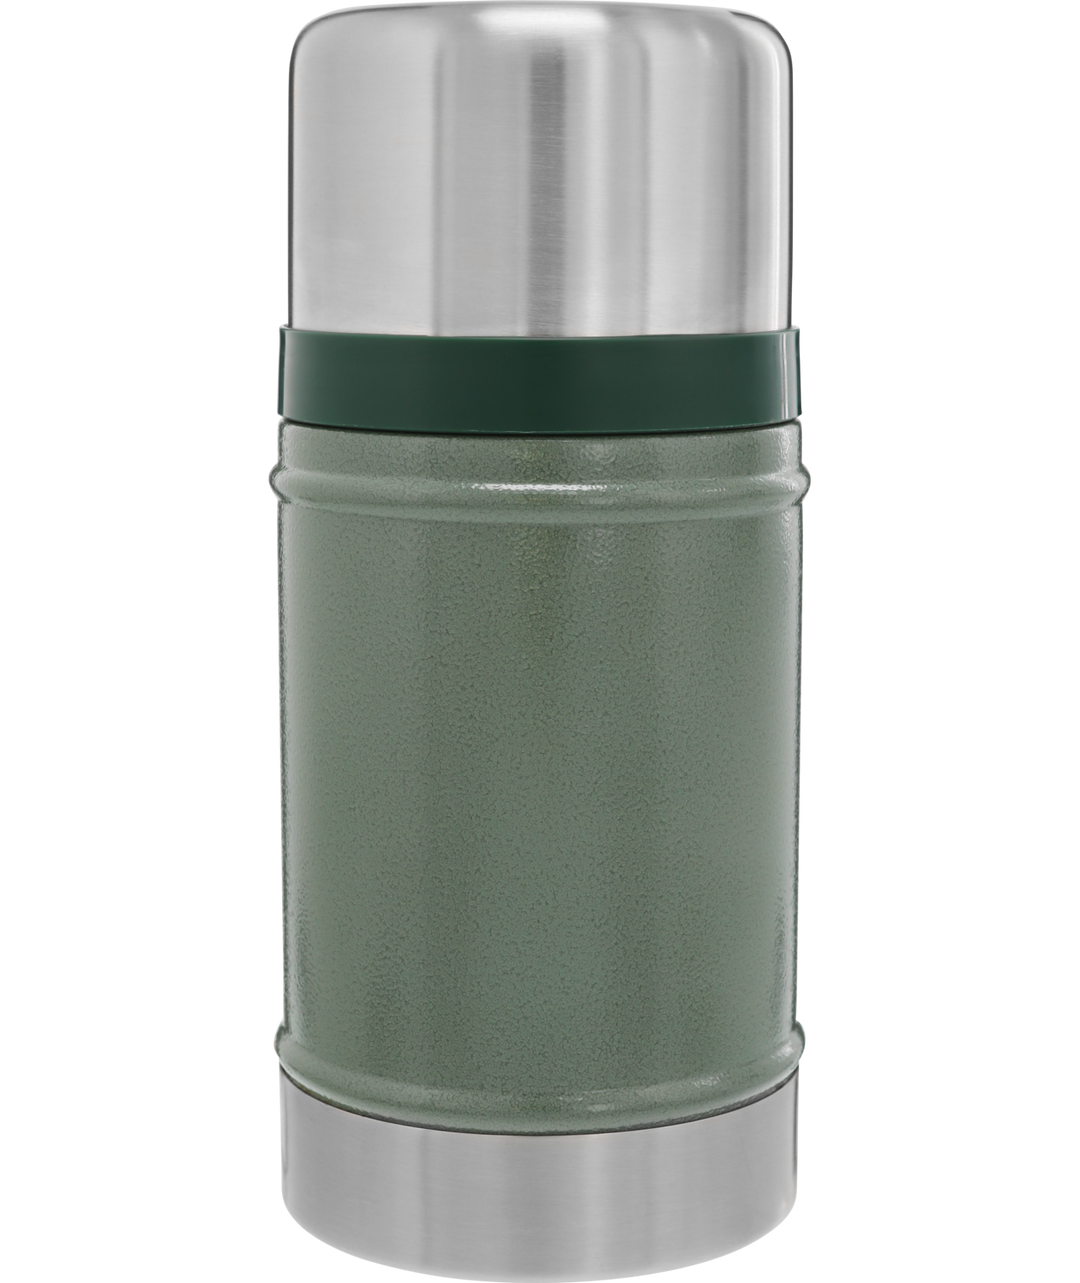 Classic Vintage Stanley Green Thermos 3-Cups 24 Oz. with Handle + Cup Lid  Clean!